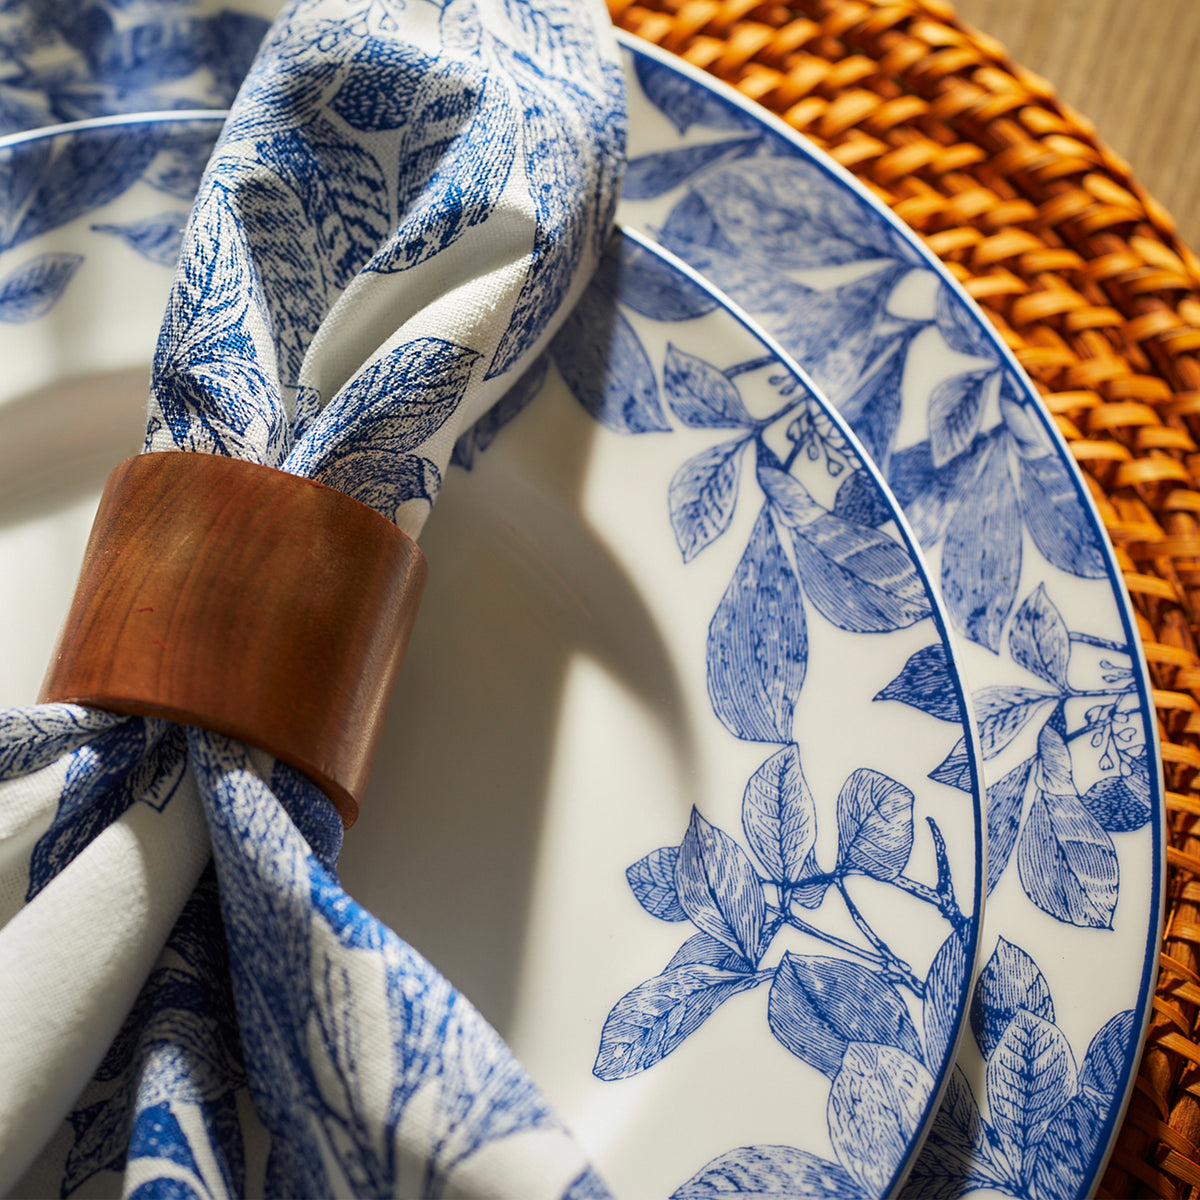 A Arbor Blue Rimmed Dinner Plate with a premium porcelain body, decorated with hand-drawn detail by Caskata Artisanal Home.